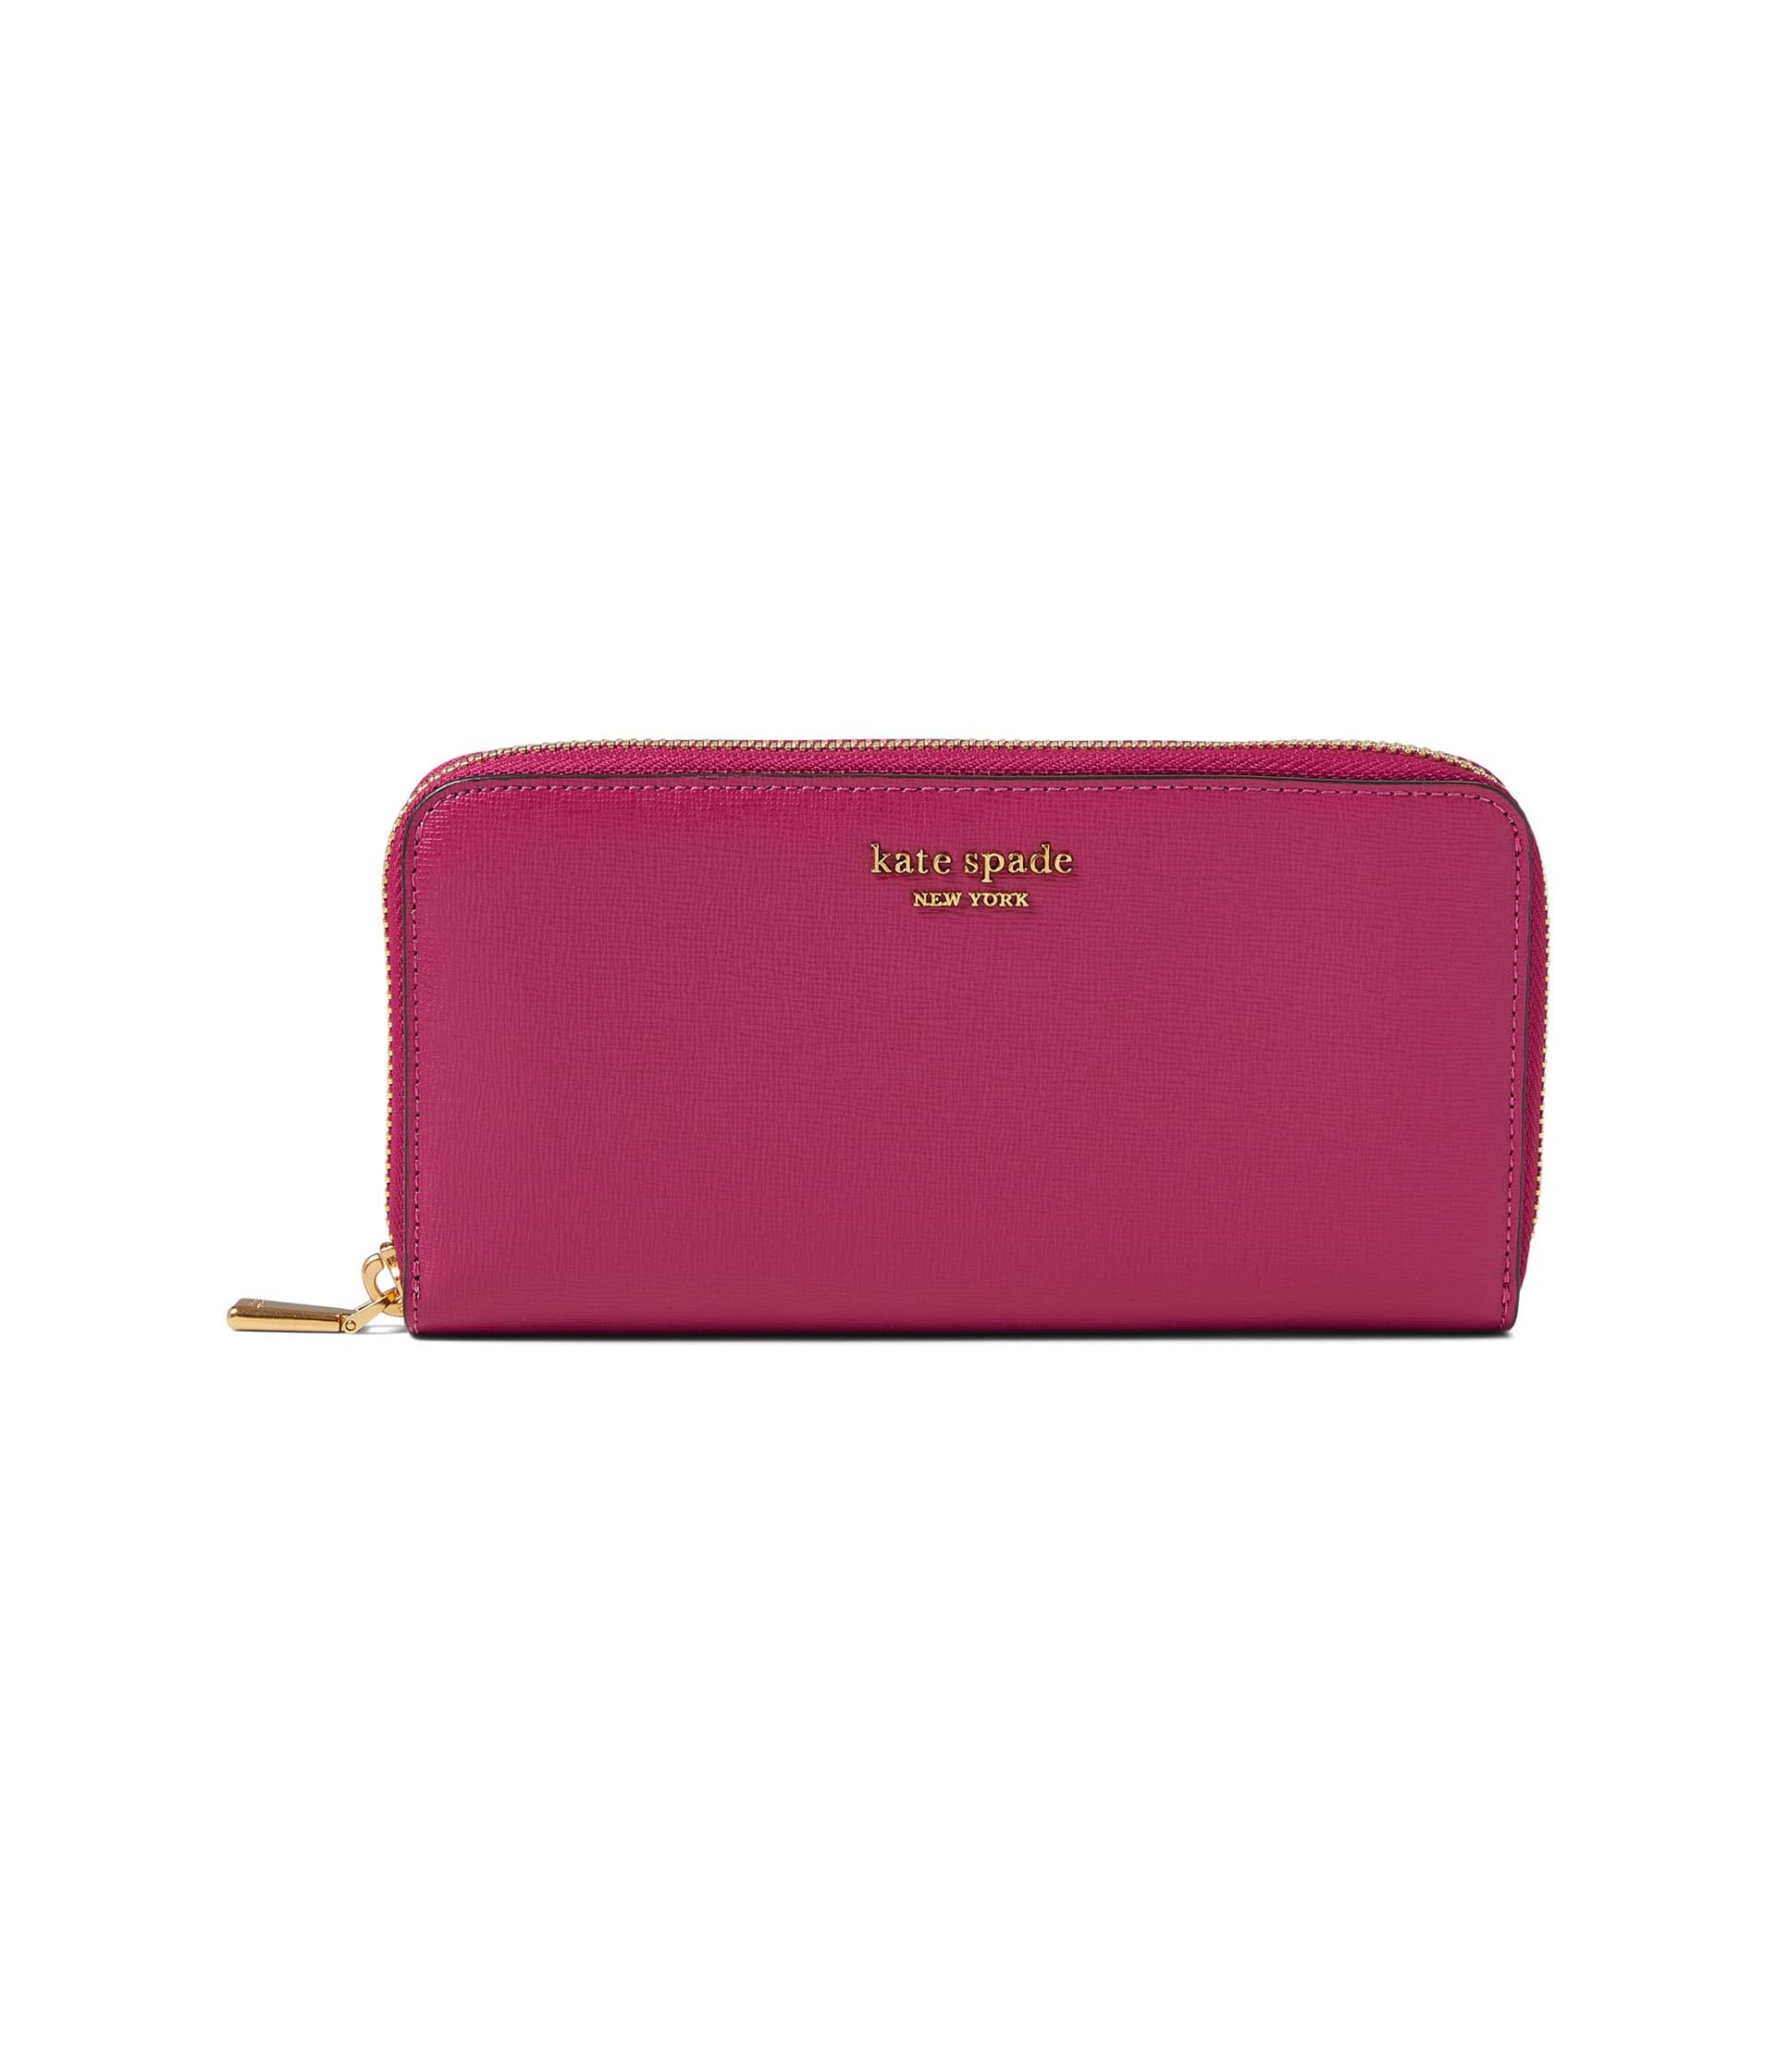 Kate Spade Morgan Saffiano Leather Zip Around Continental Wallet in Red ...